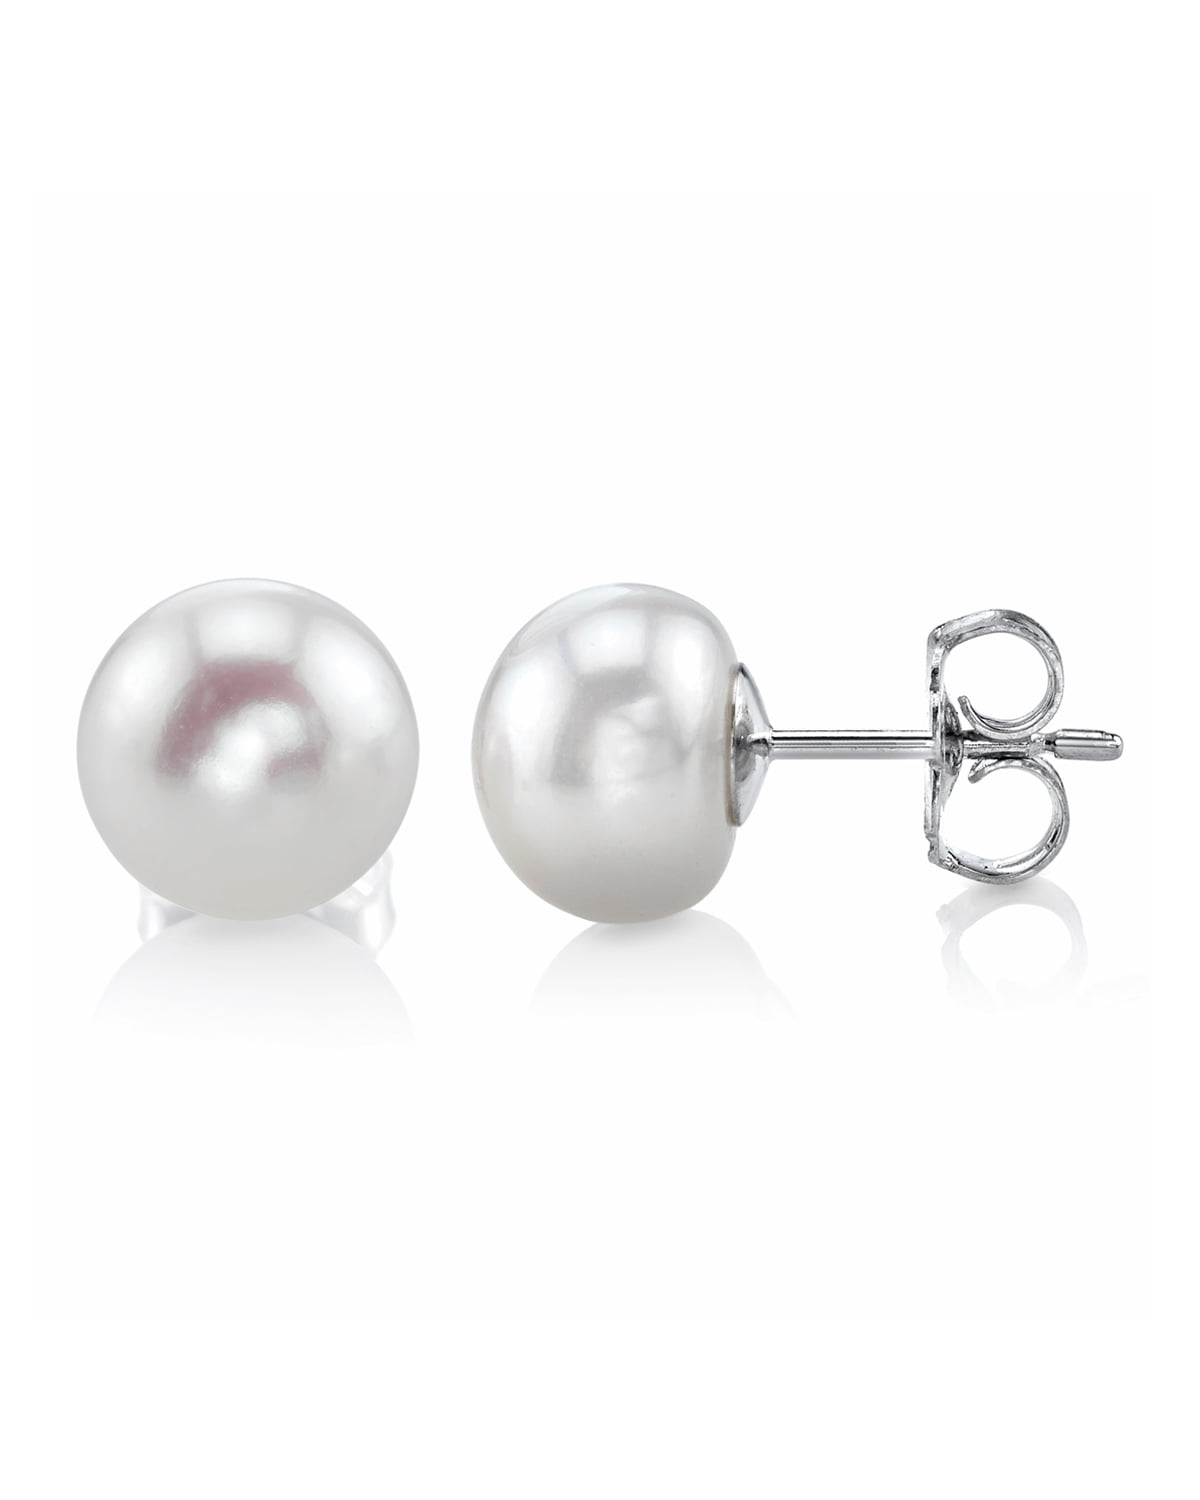 Handpicked AA Quality White Freshwater Cultured Pearls and Diamonds Earrings in 10K White Gold